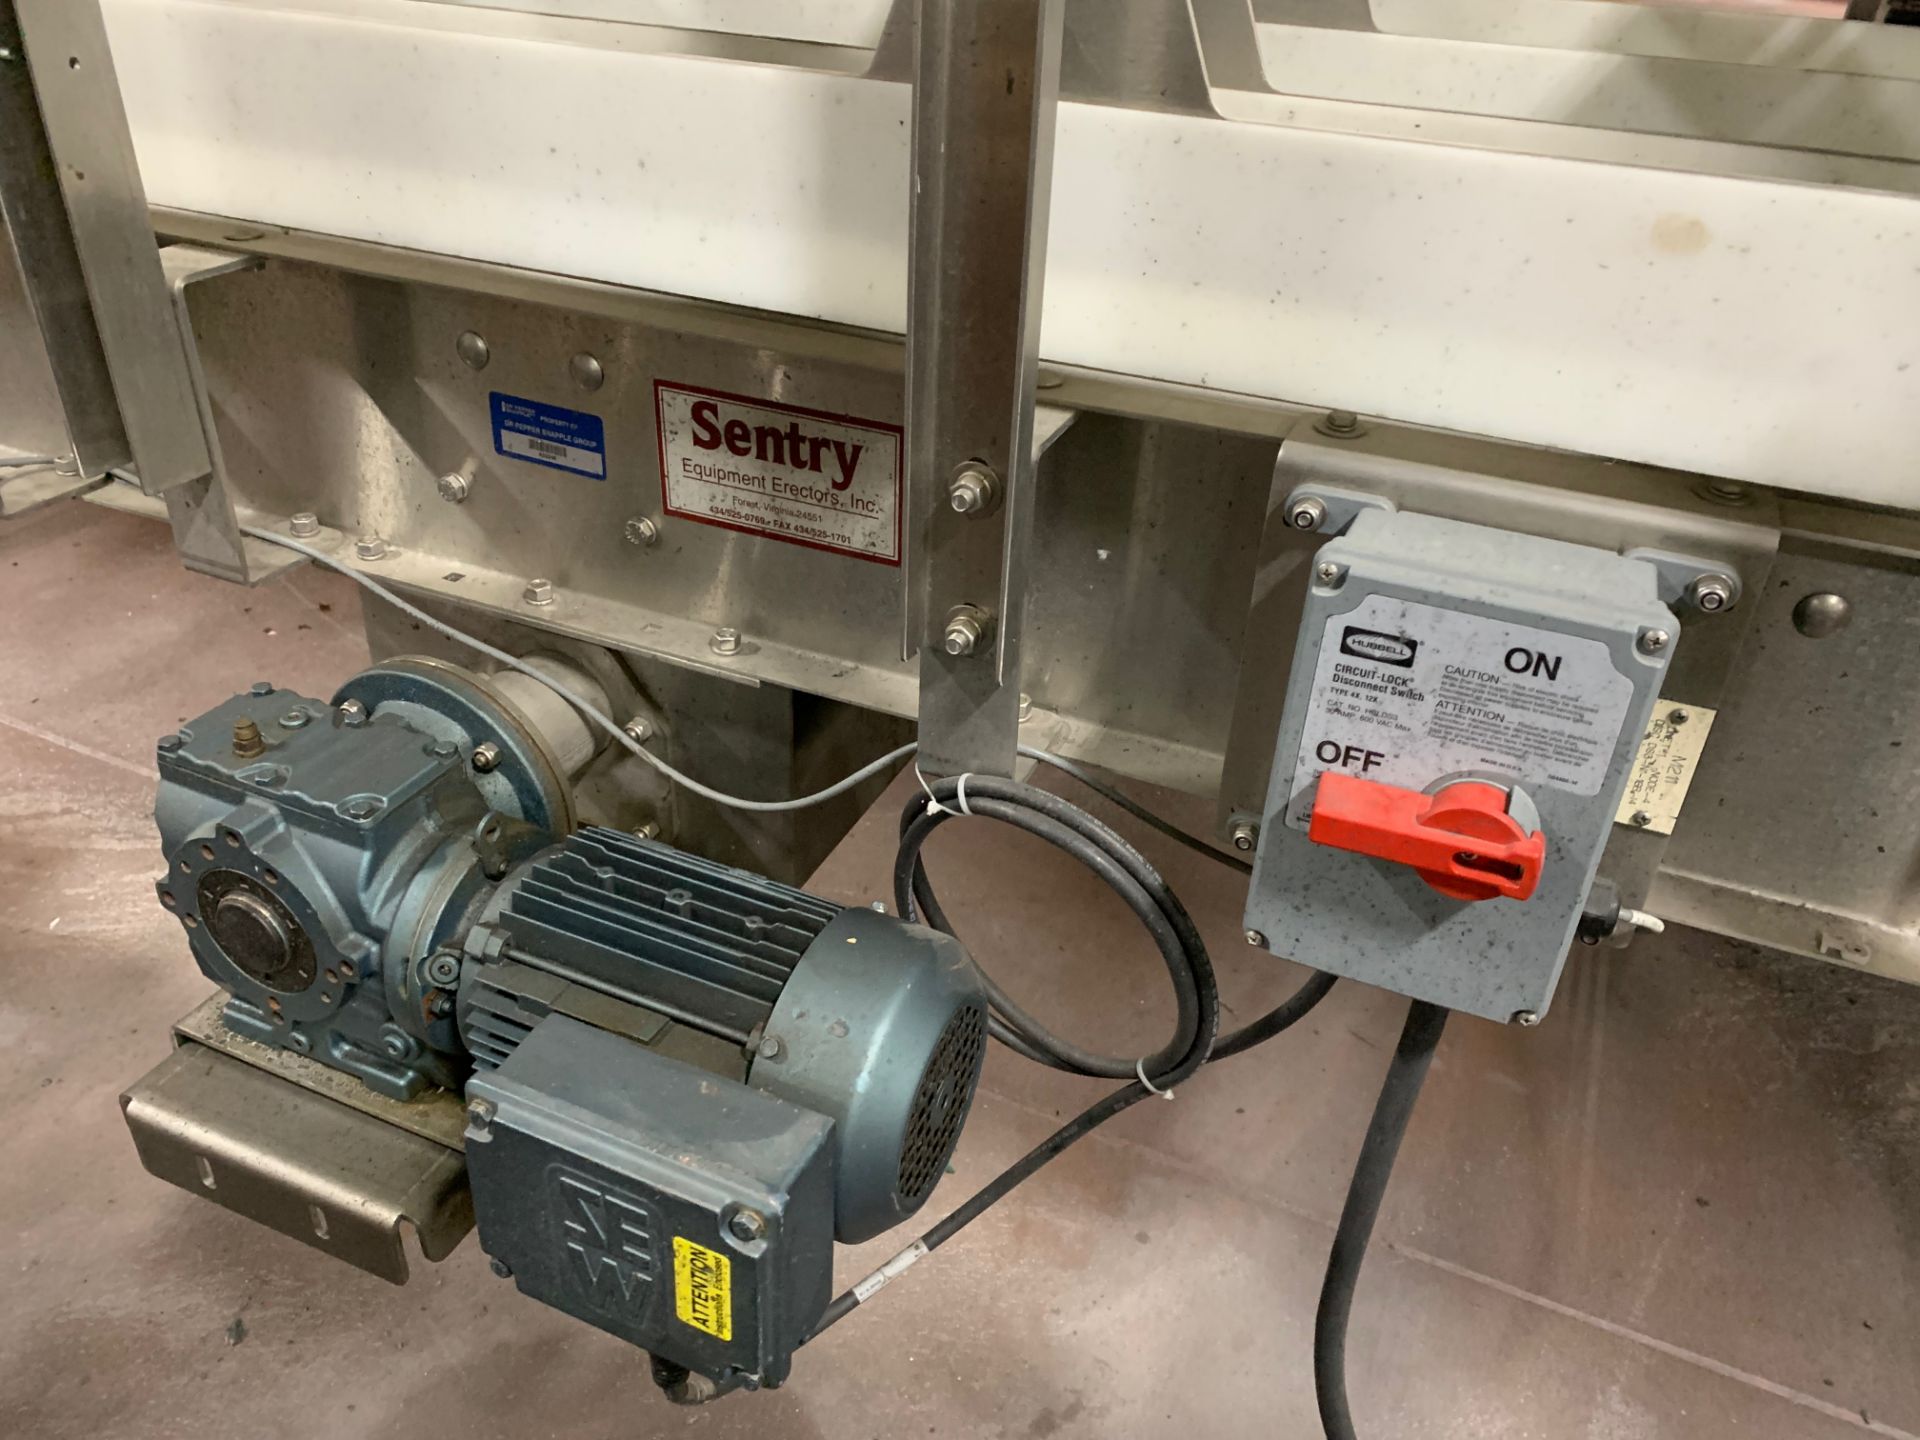 Sentry Carton Conveyor from Divider Switch to Krones Traypacker - Image 5 of 17